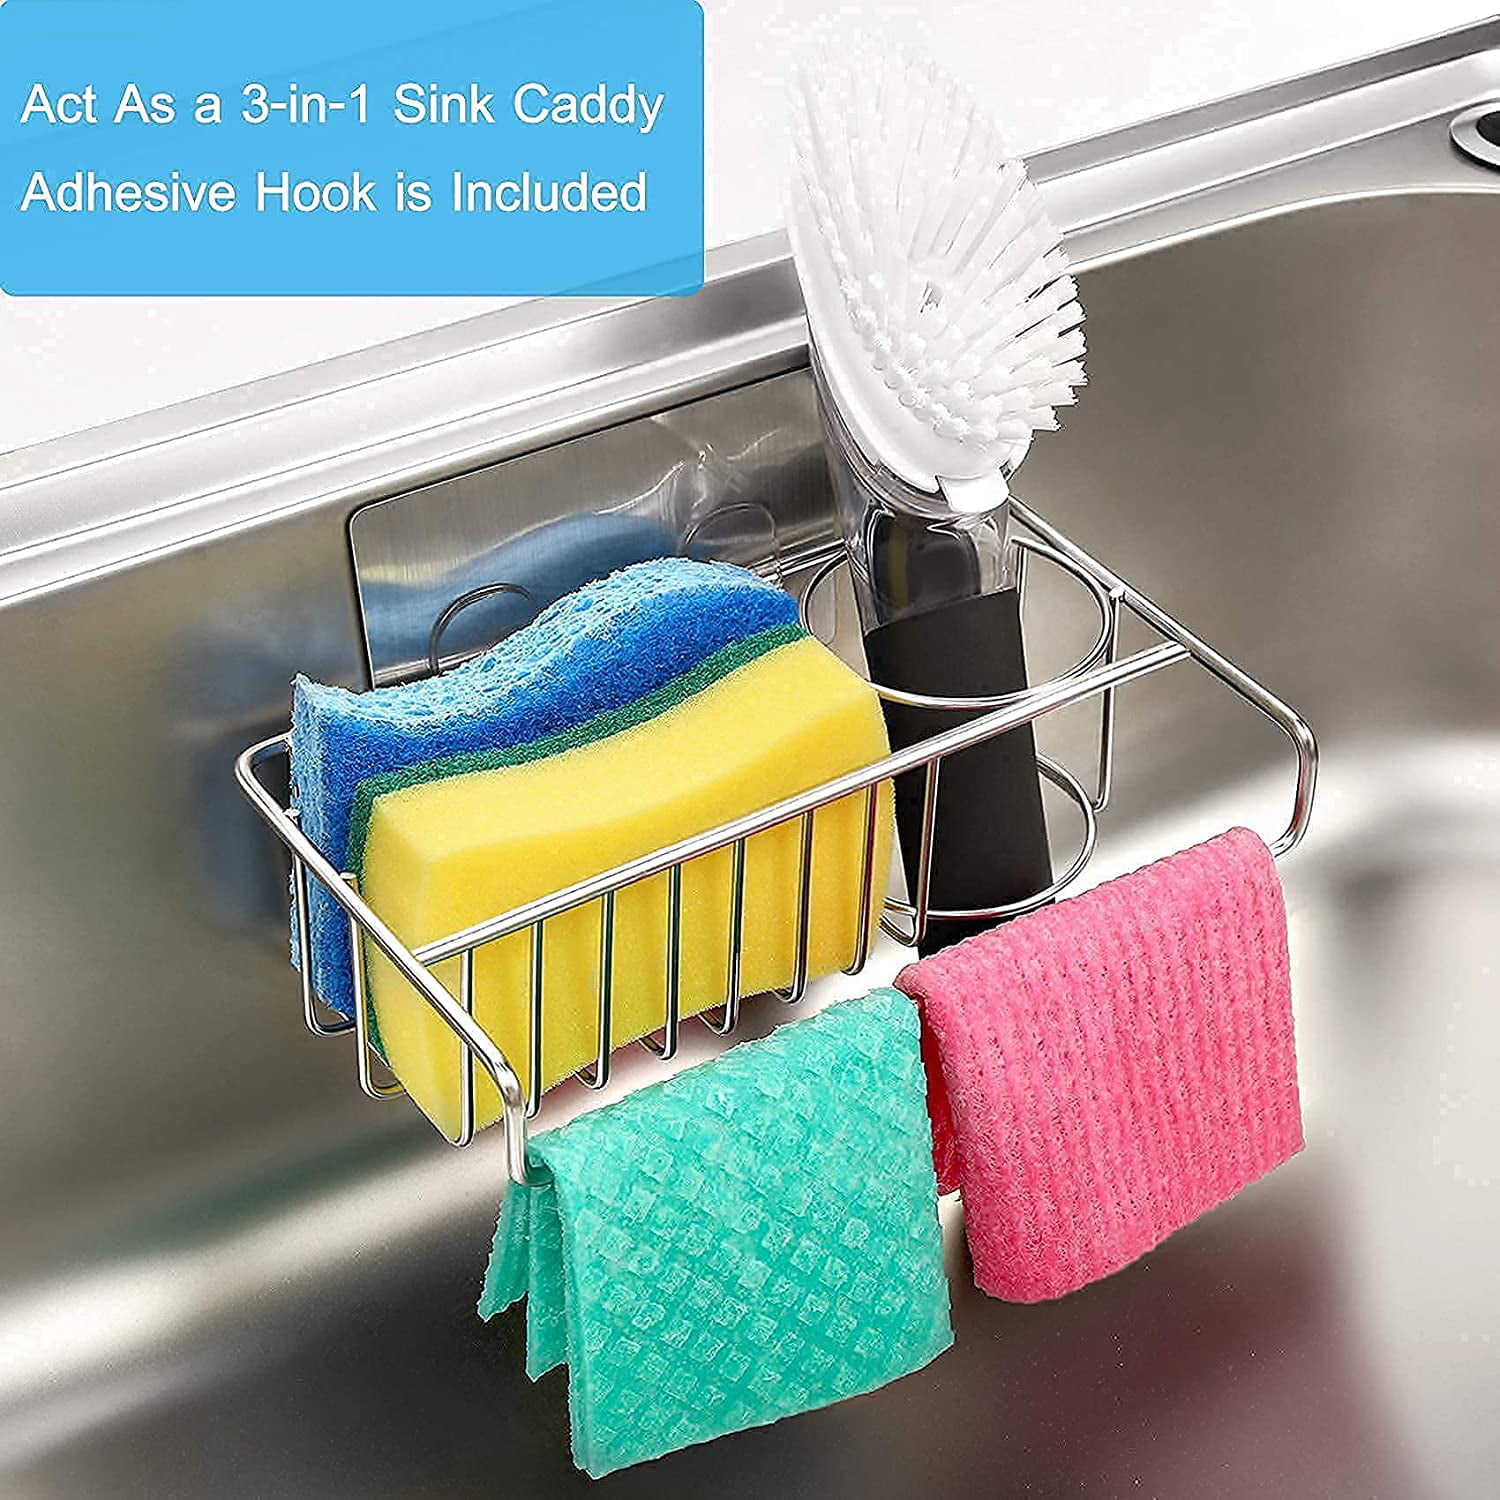 Aozita 3-in-1 Sponge Holder for Kitchen Sink, Movable Brush Holder + Dish Cloth Hanger, Hanging Caddy, Small in Organizer Accessories Rack Basket, 304